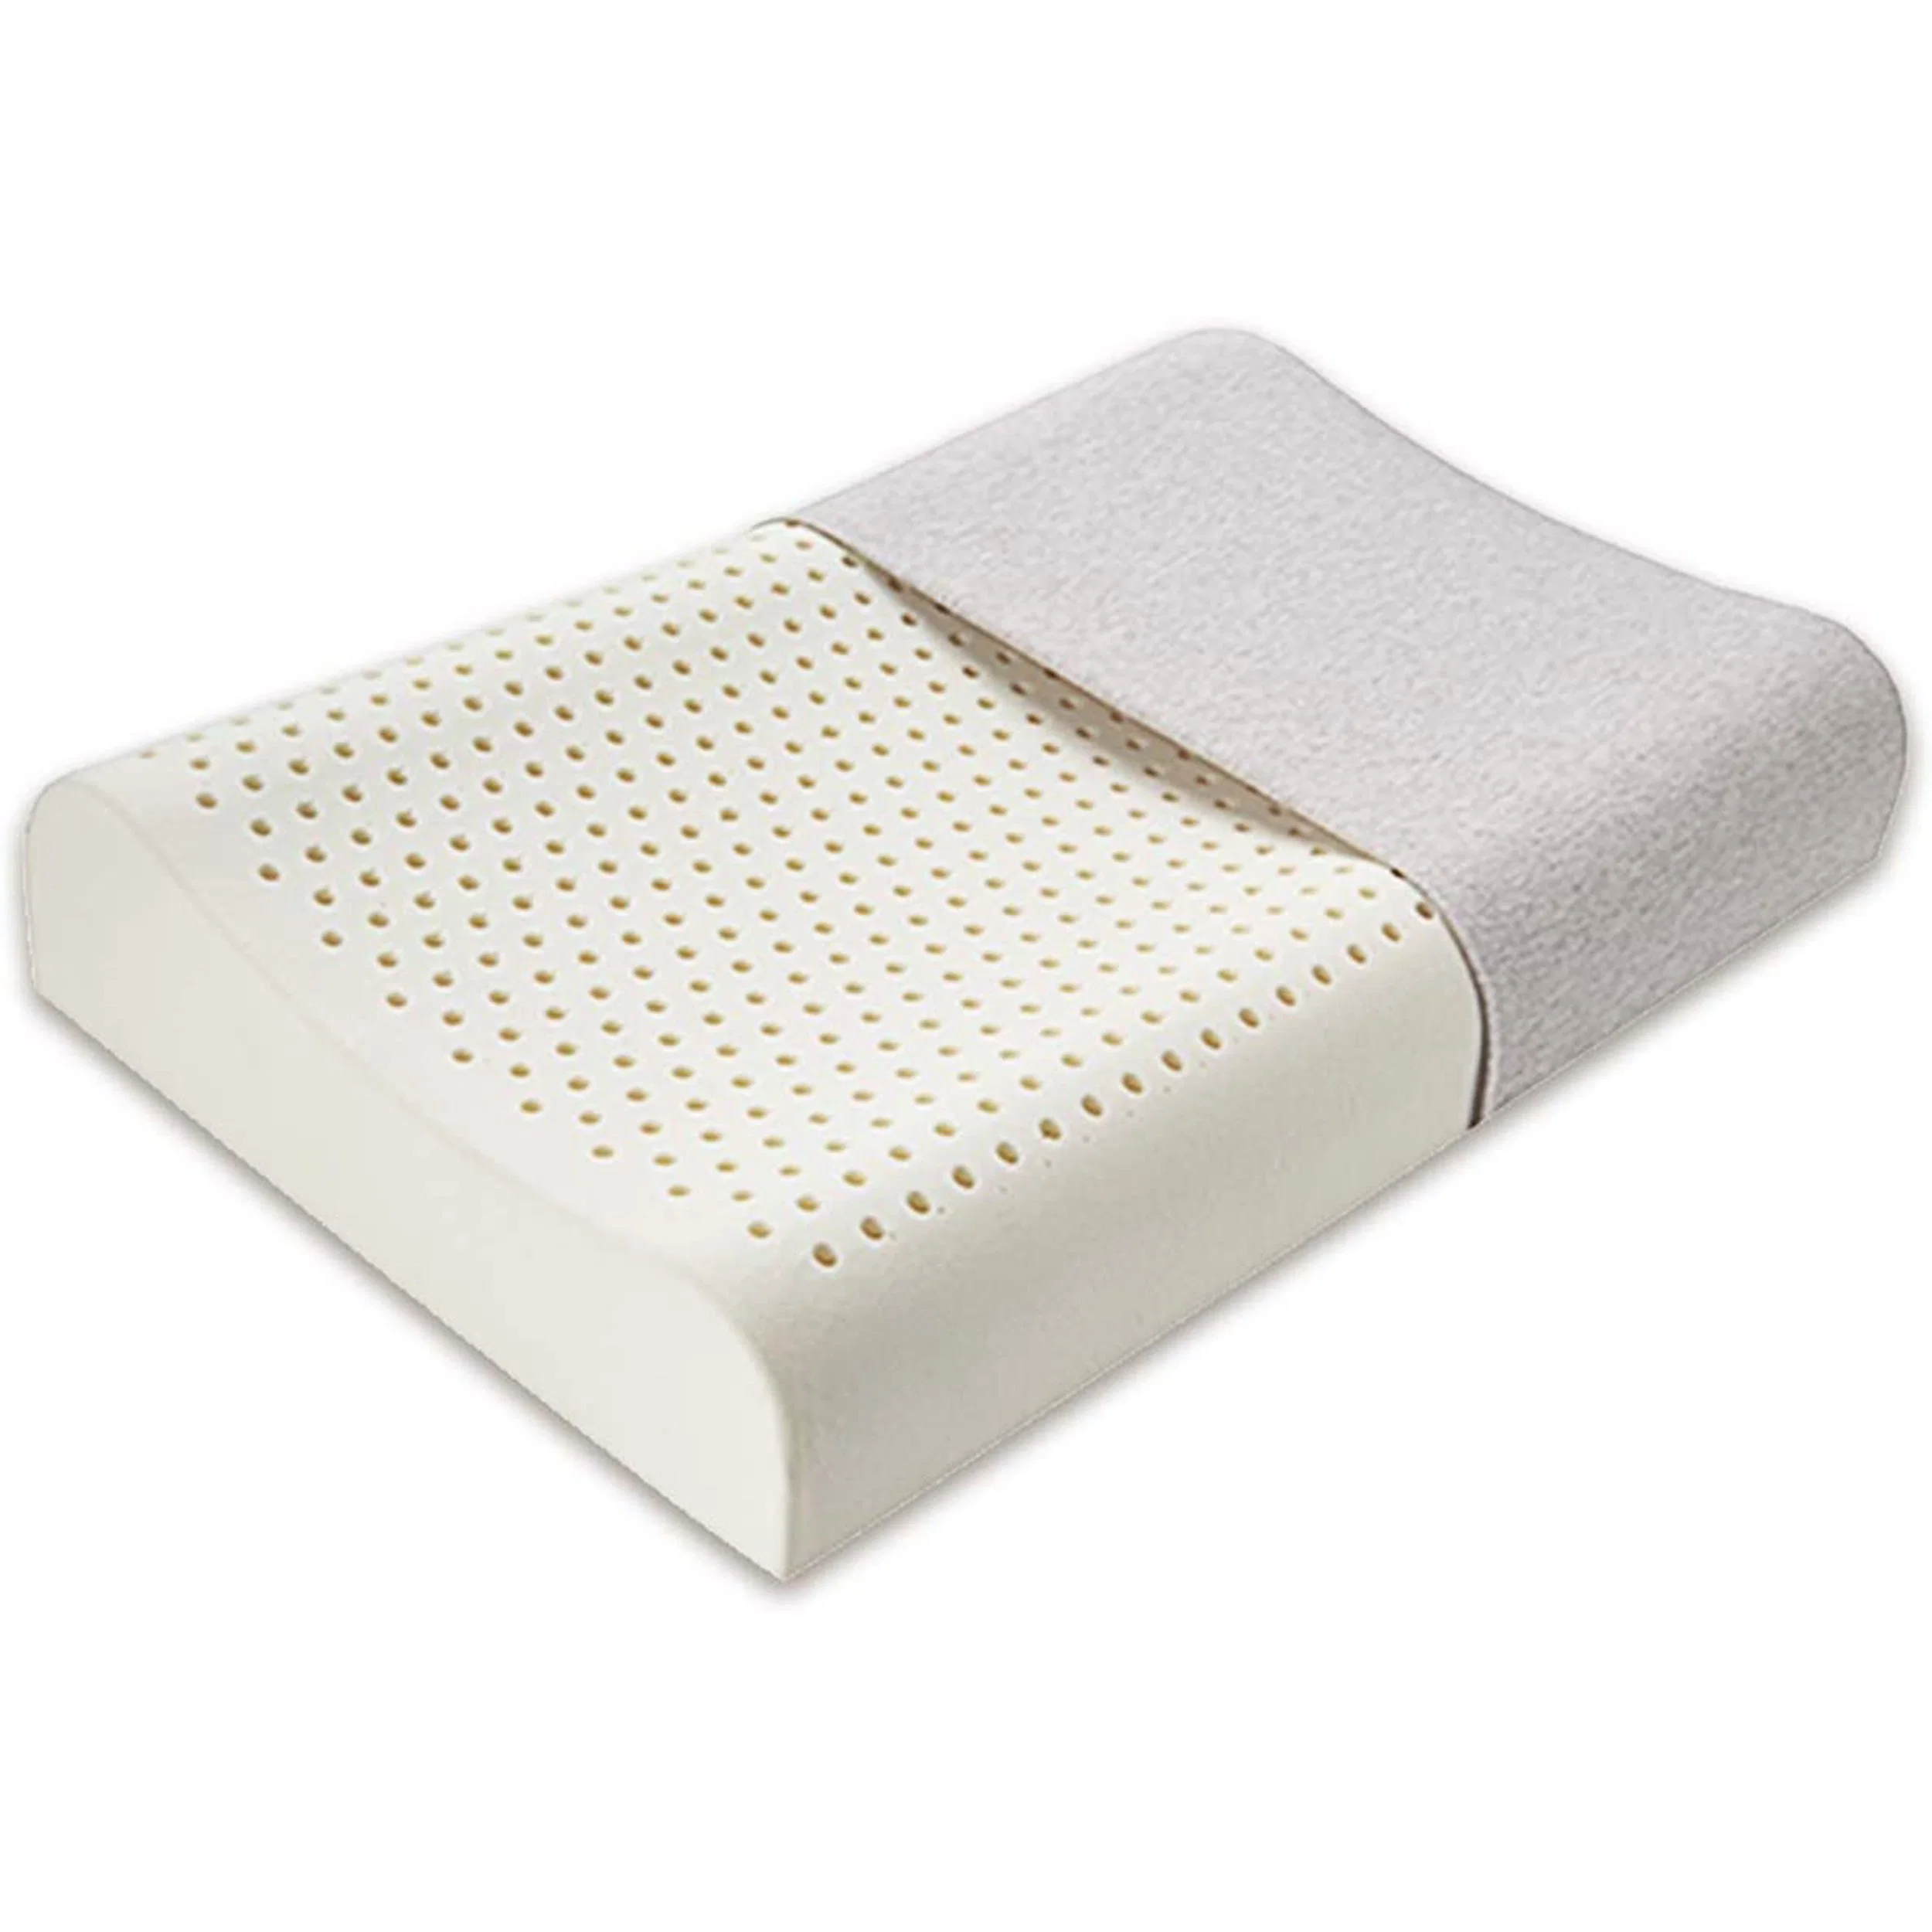 Latex Foam Bed Pillow for Sleeping: Firm Bedding Pillows - Soft Bedroom Pillow for Side Sleepers